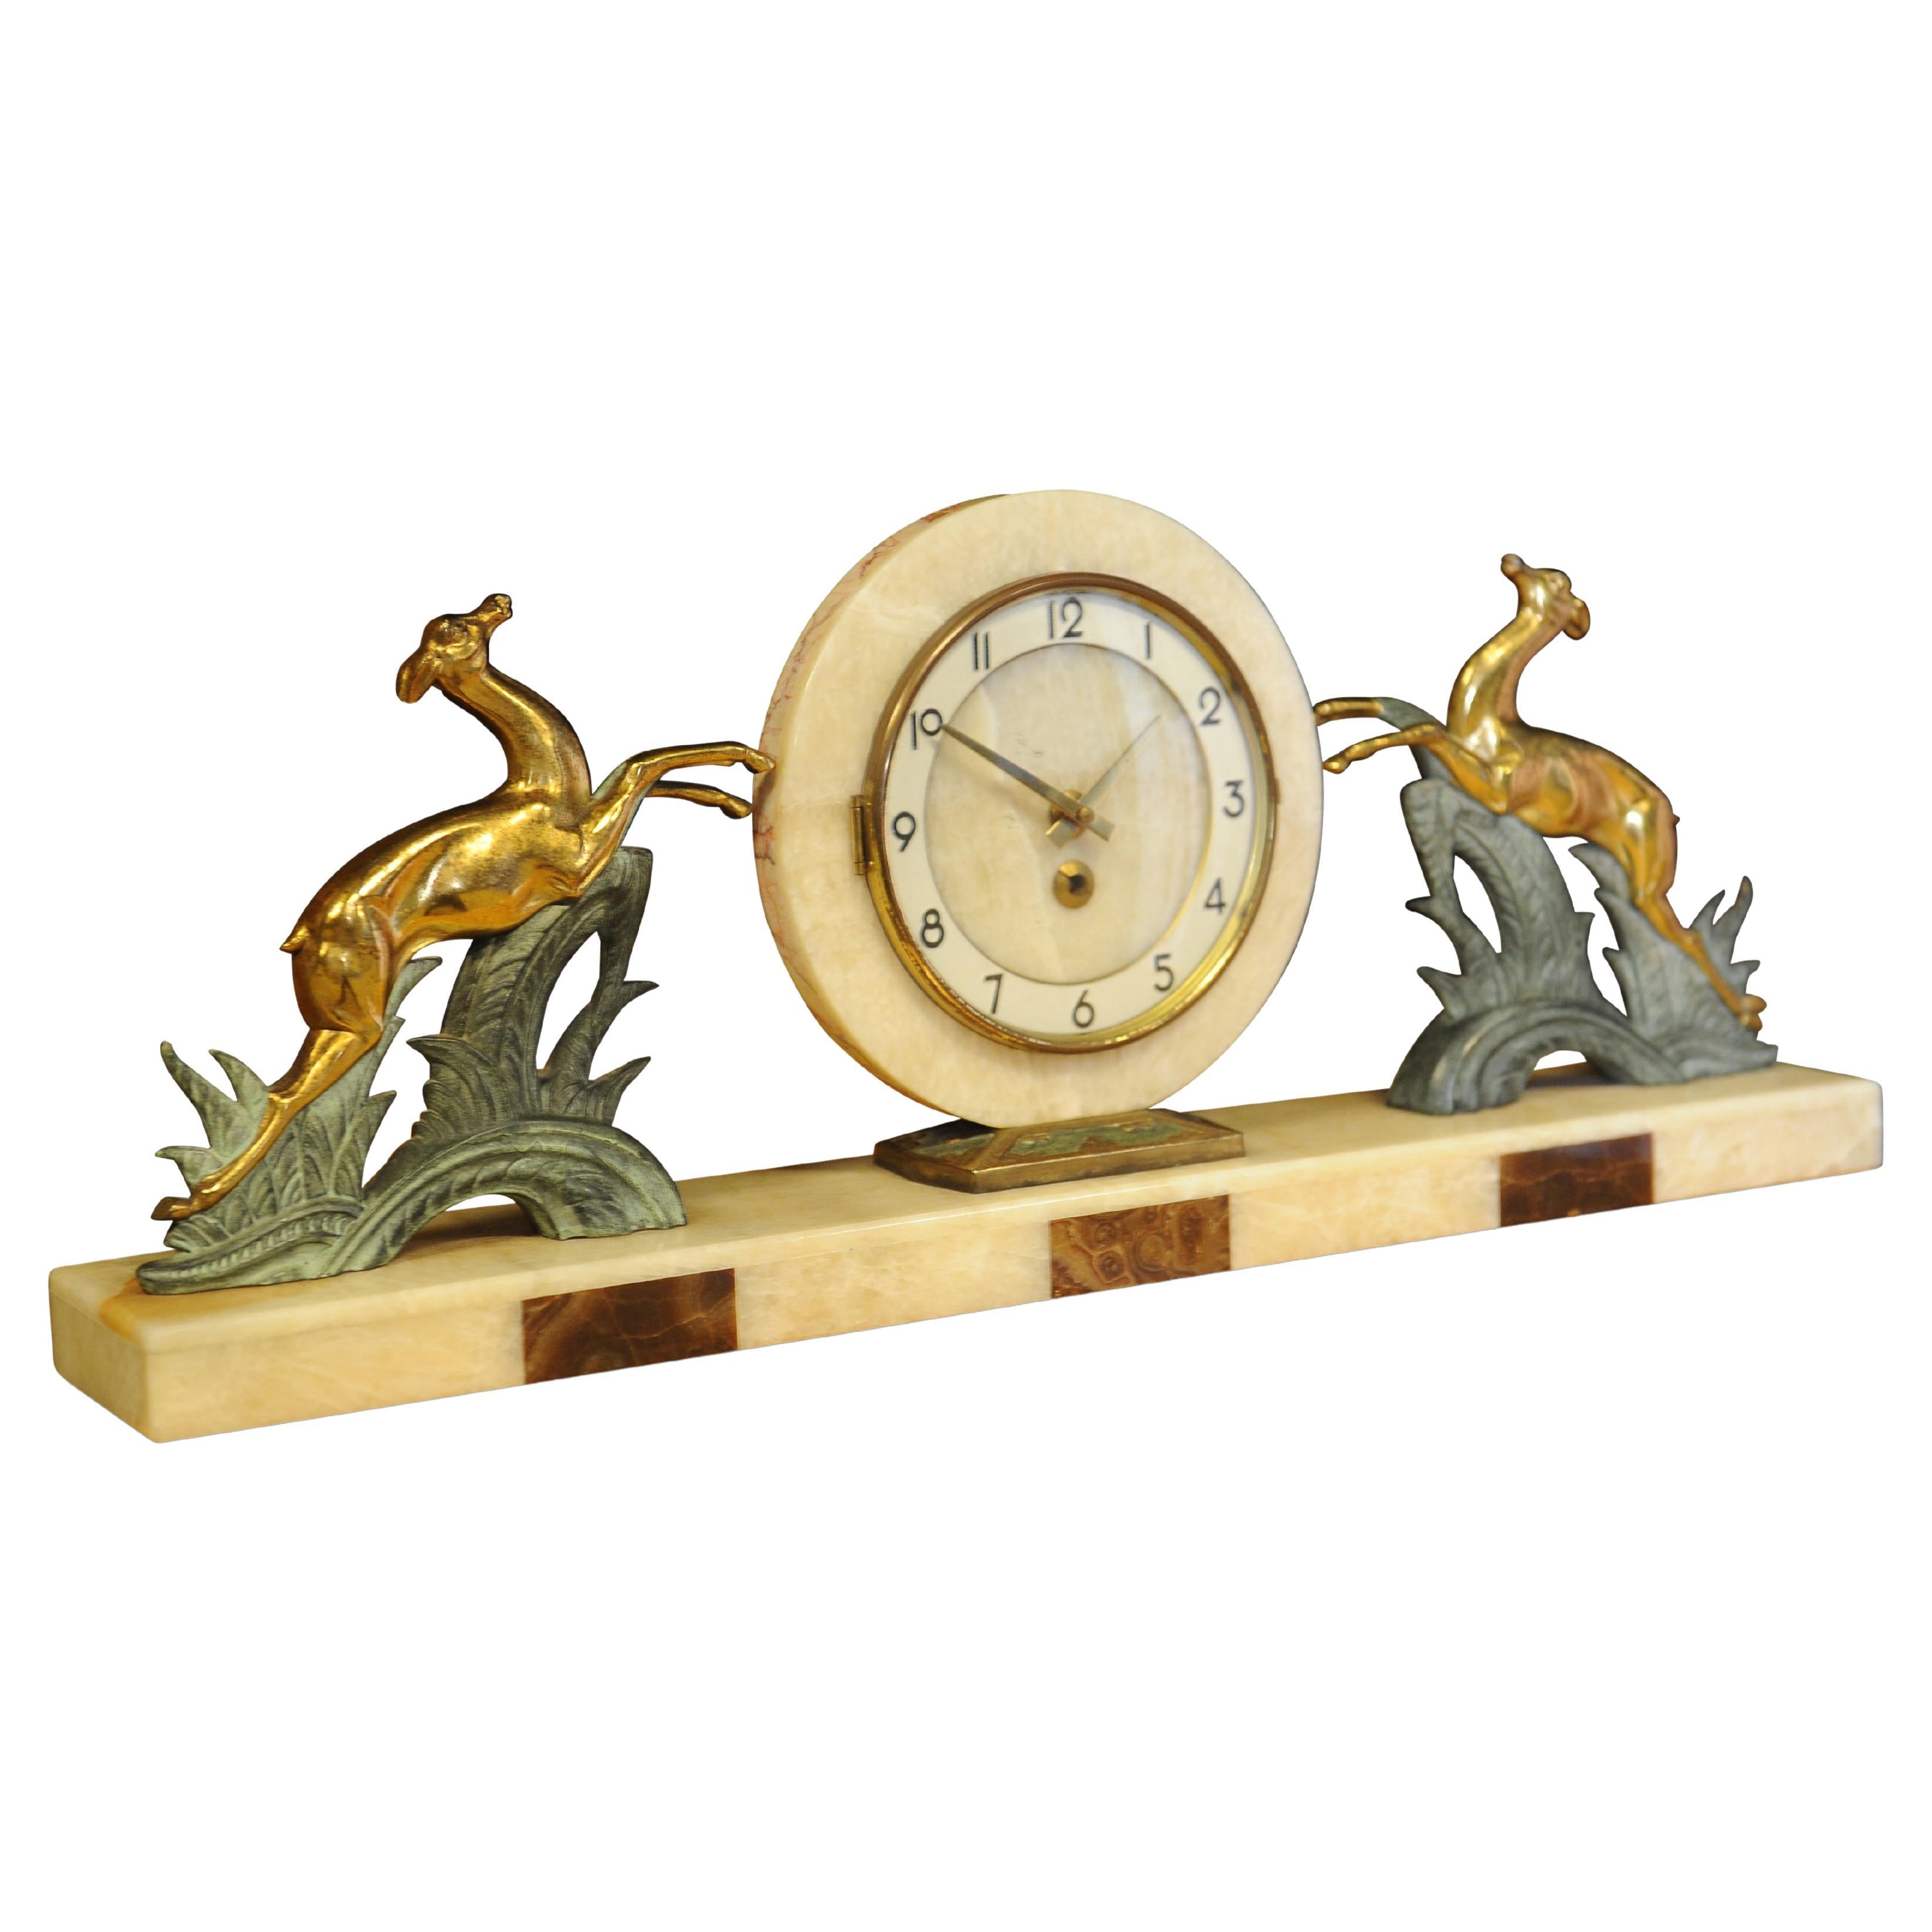 20th Century Art Deco Marble and Onyx Mantel Clock by Albert Villon for Bayard 1930s  For Sale